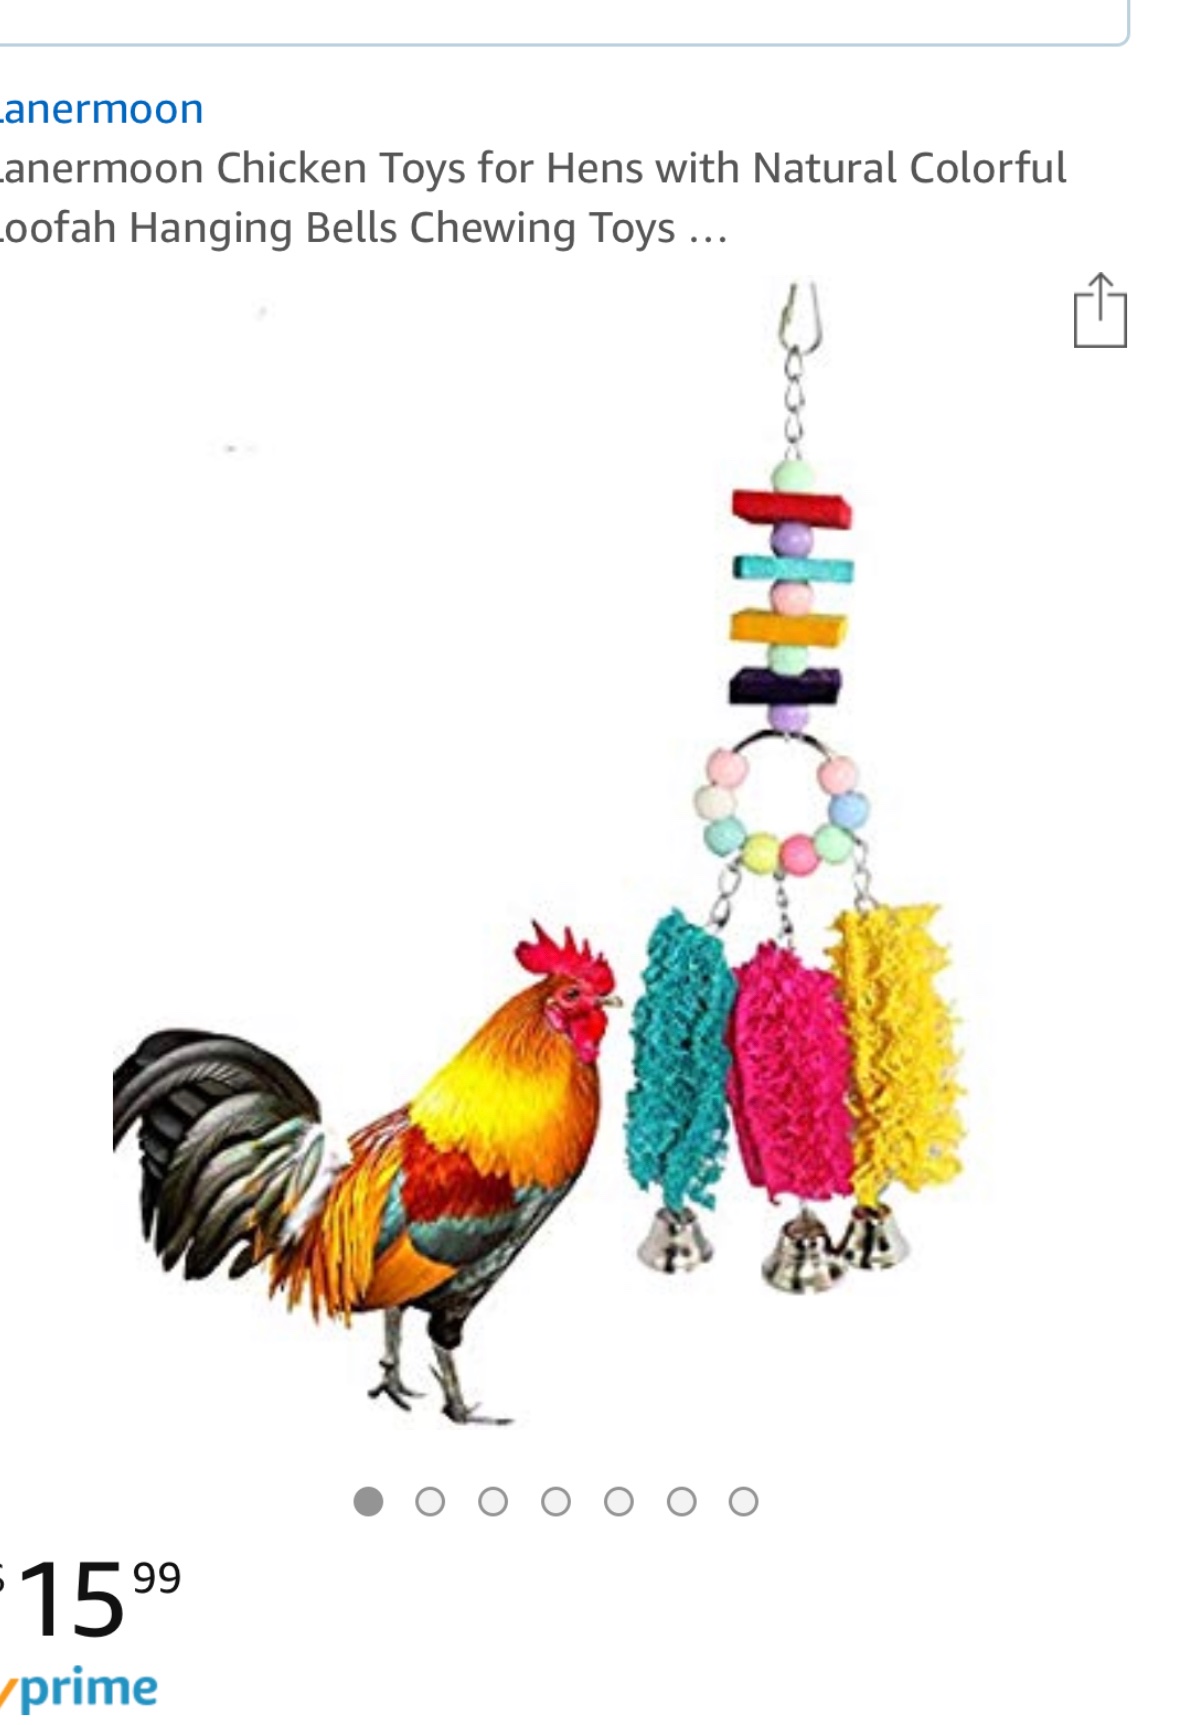 EBaokuup 10PCS Chicken Toys for Hens Chicken Bridge Swing Toys Chicken Pecking Toys Chicken Xylophone Toy Chicken Mirror Toys and Vegetable Hanging Feeder for Chicken Hens 